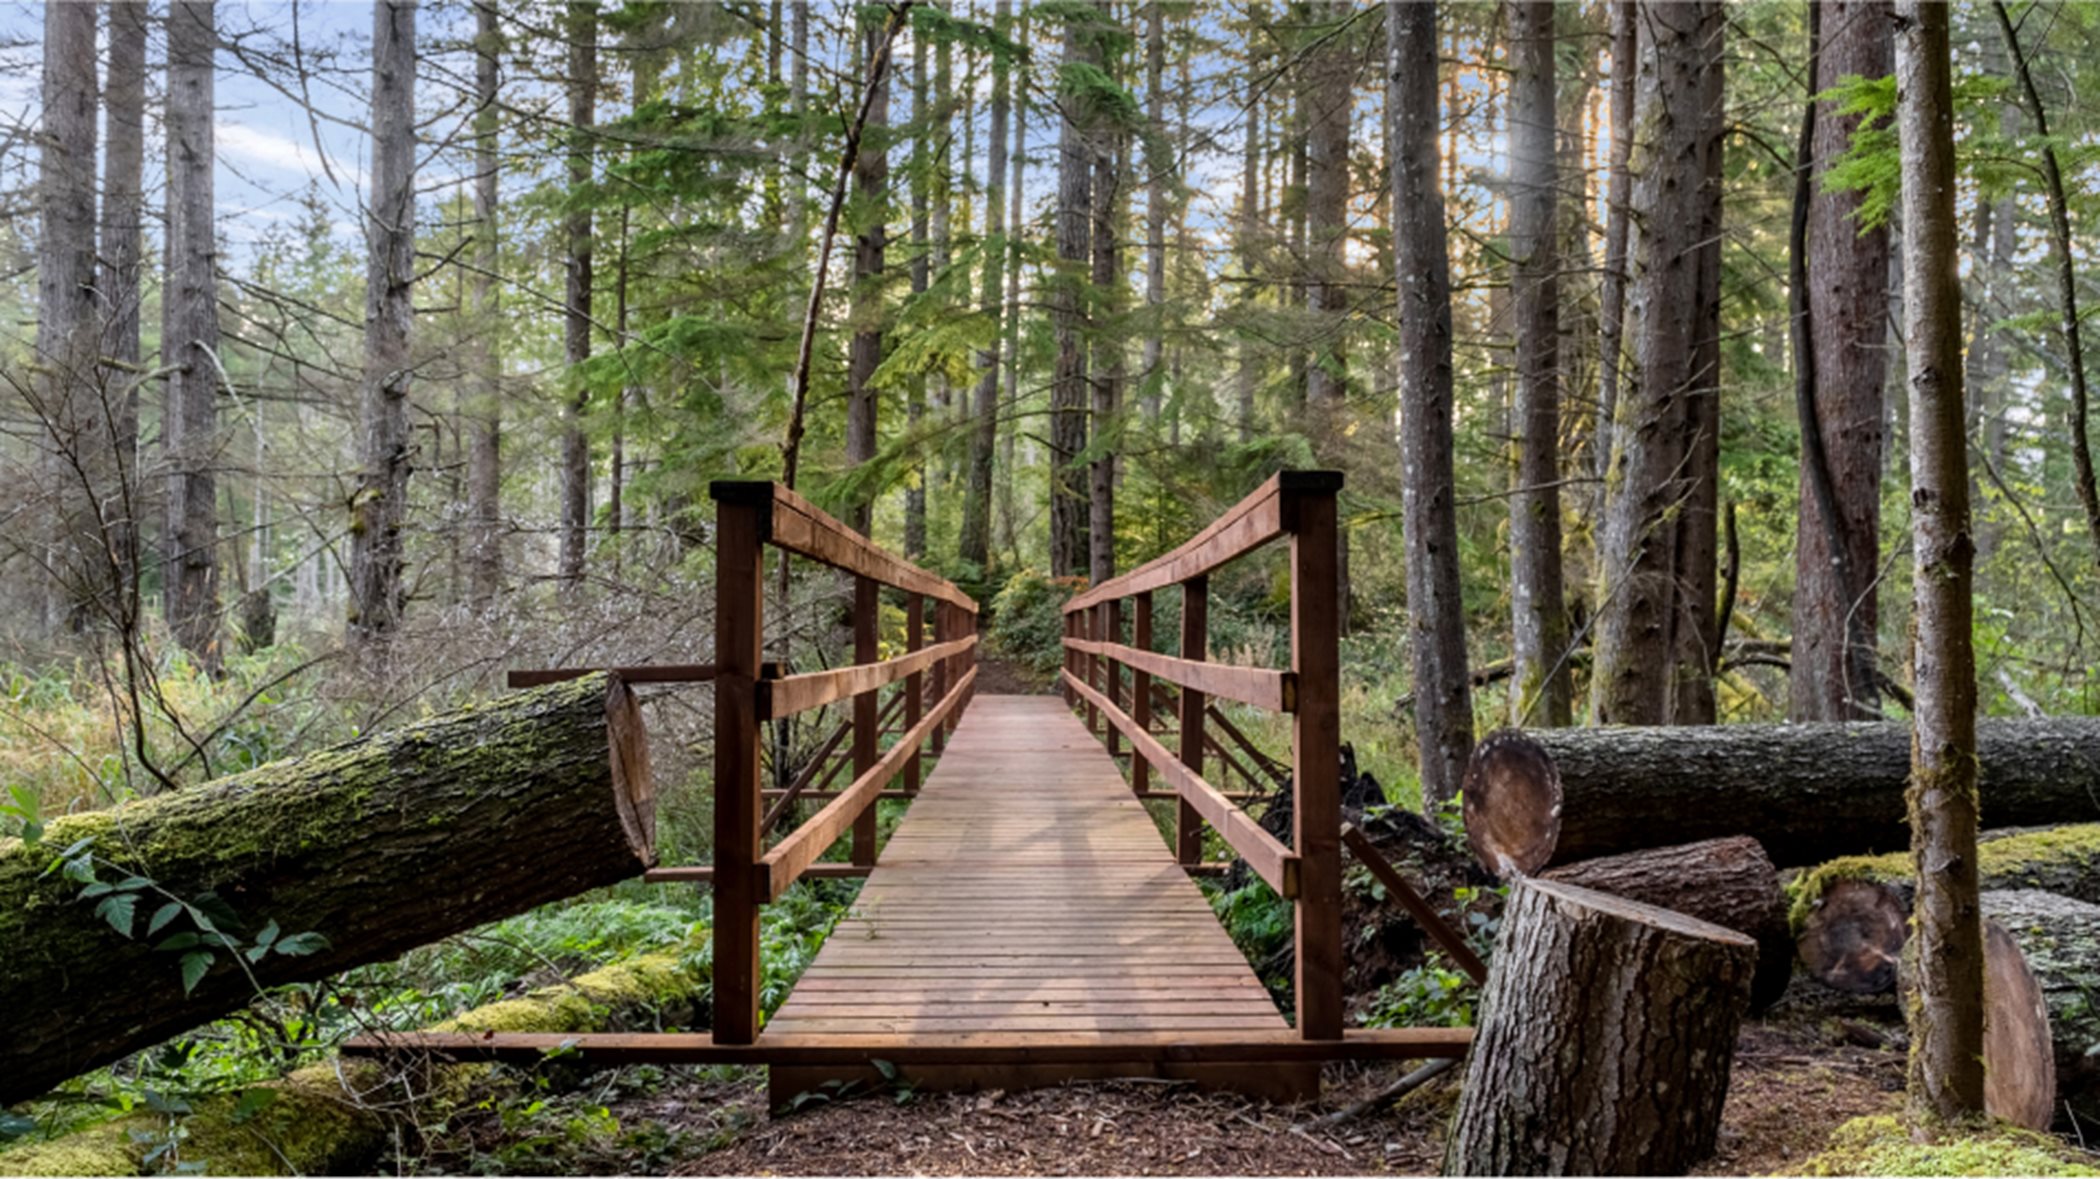 Wood walking bridge in a forested area